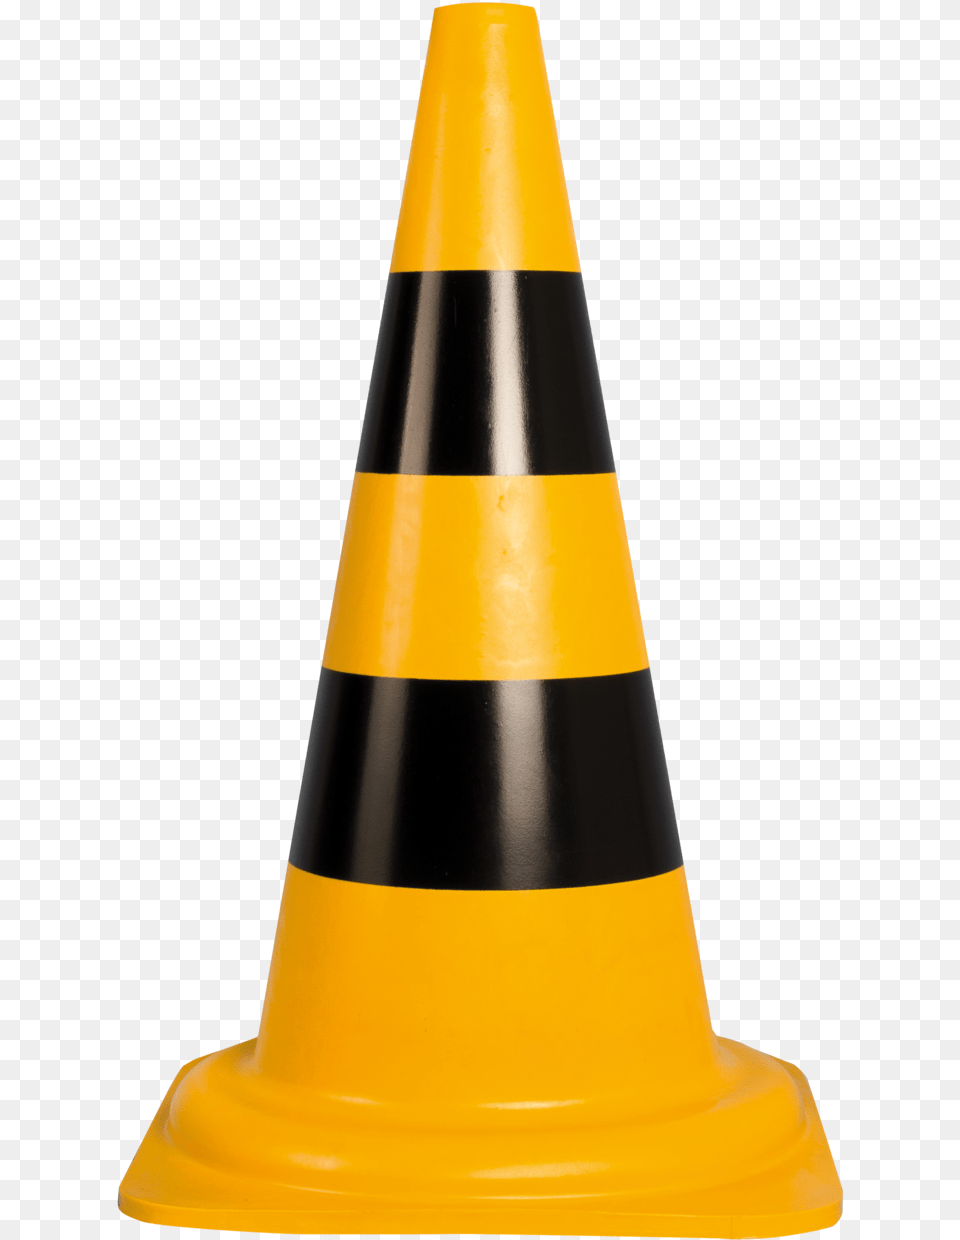 Traffic Cone Daylightquot Traffic Cone Free Transparent Png